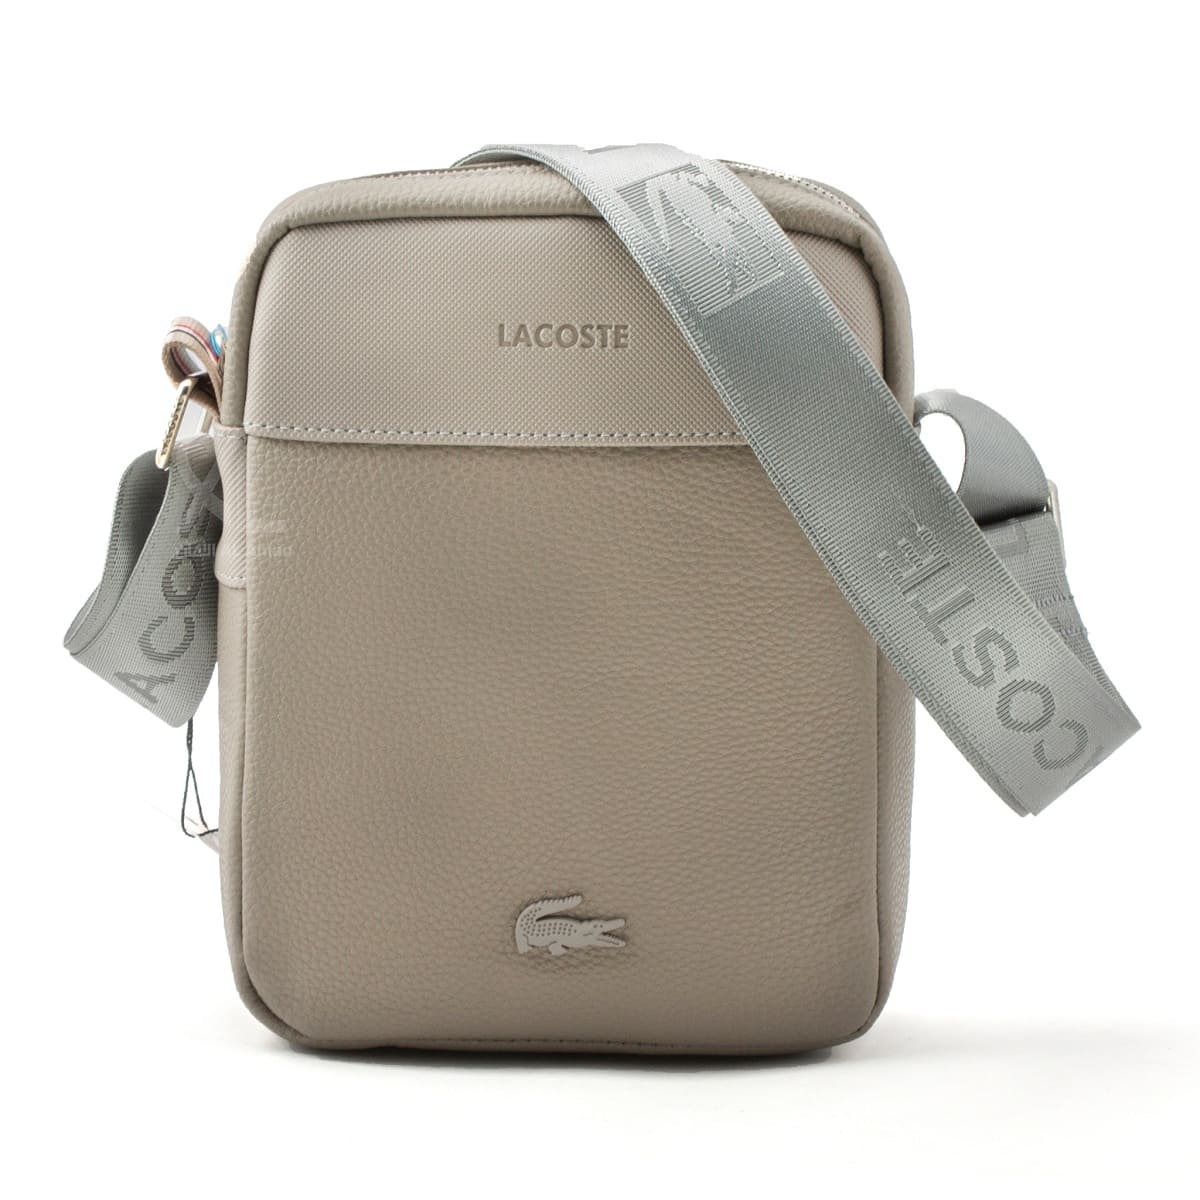 Lacoste-crossbag-with-hand-gray-color-leather-for-men